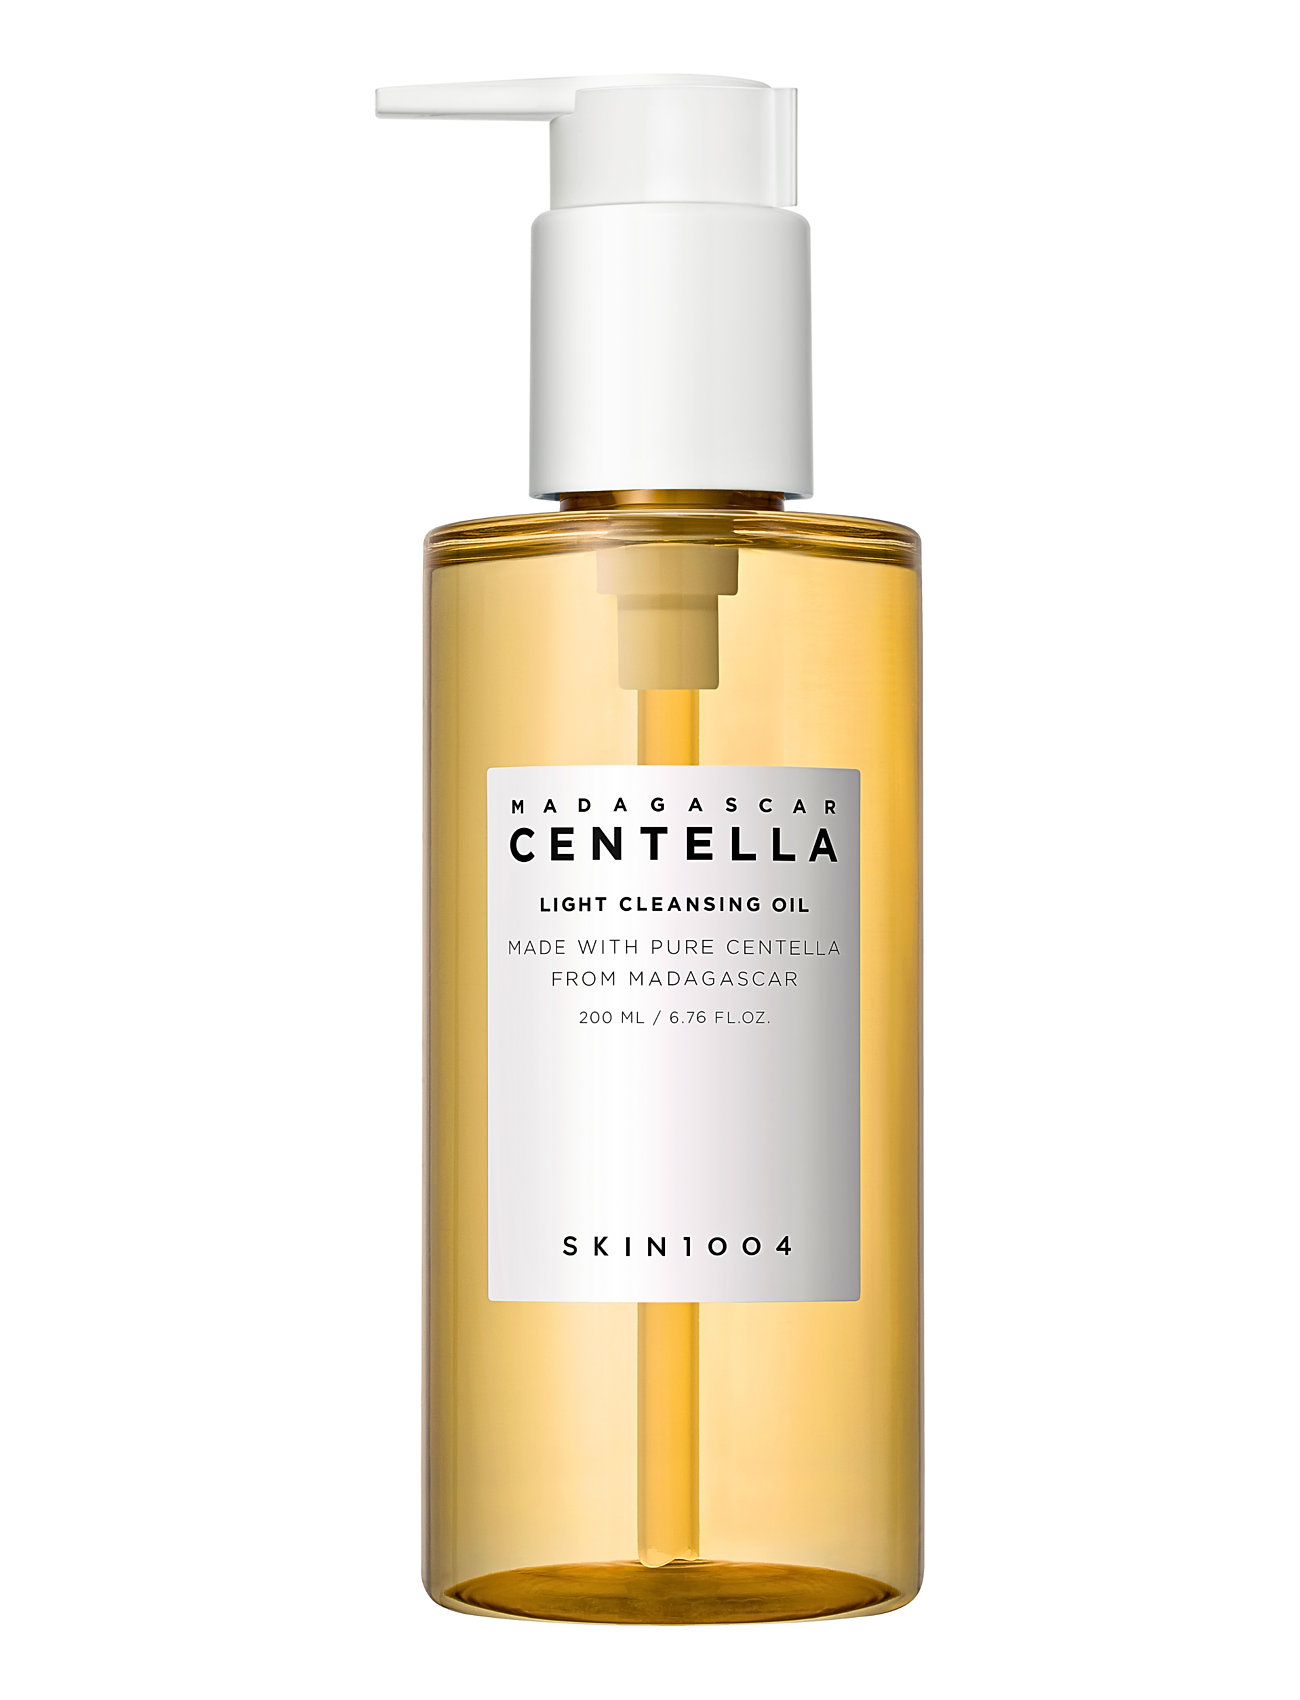 Madagascar Centella Light Cleansing Oil Beauty Women Skin Care Face Cleansers Oil Cleanser Nude SKIN1004